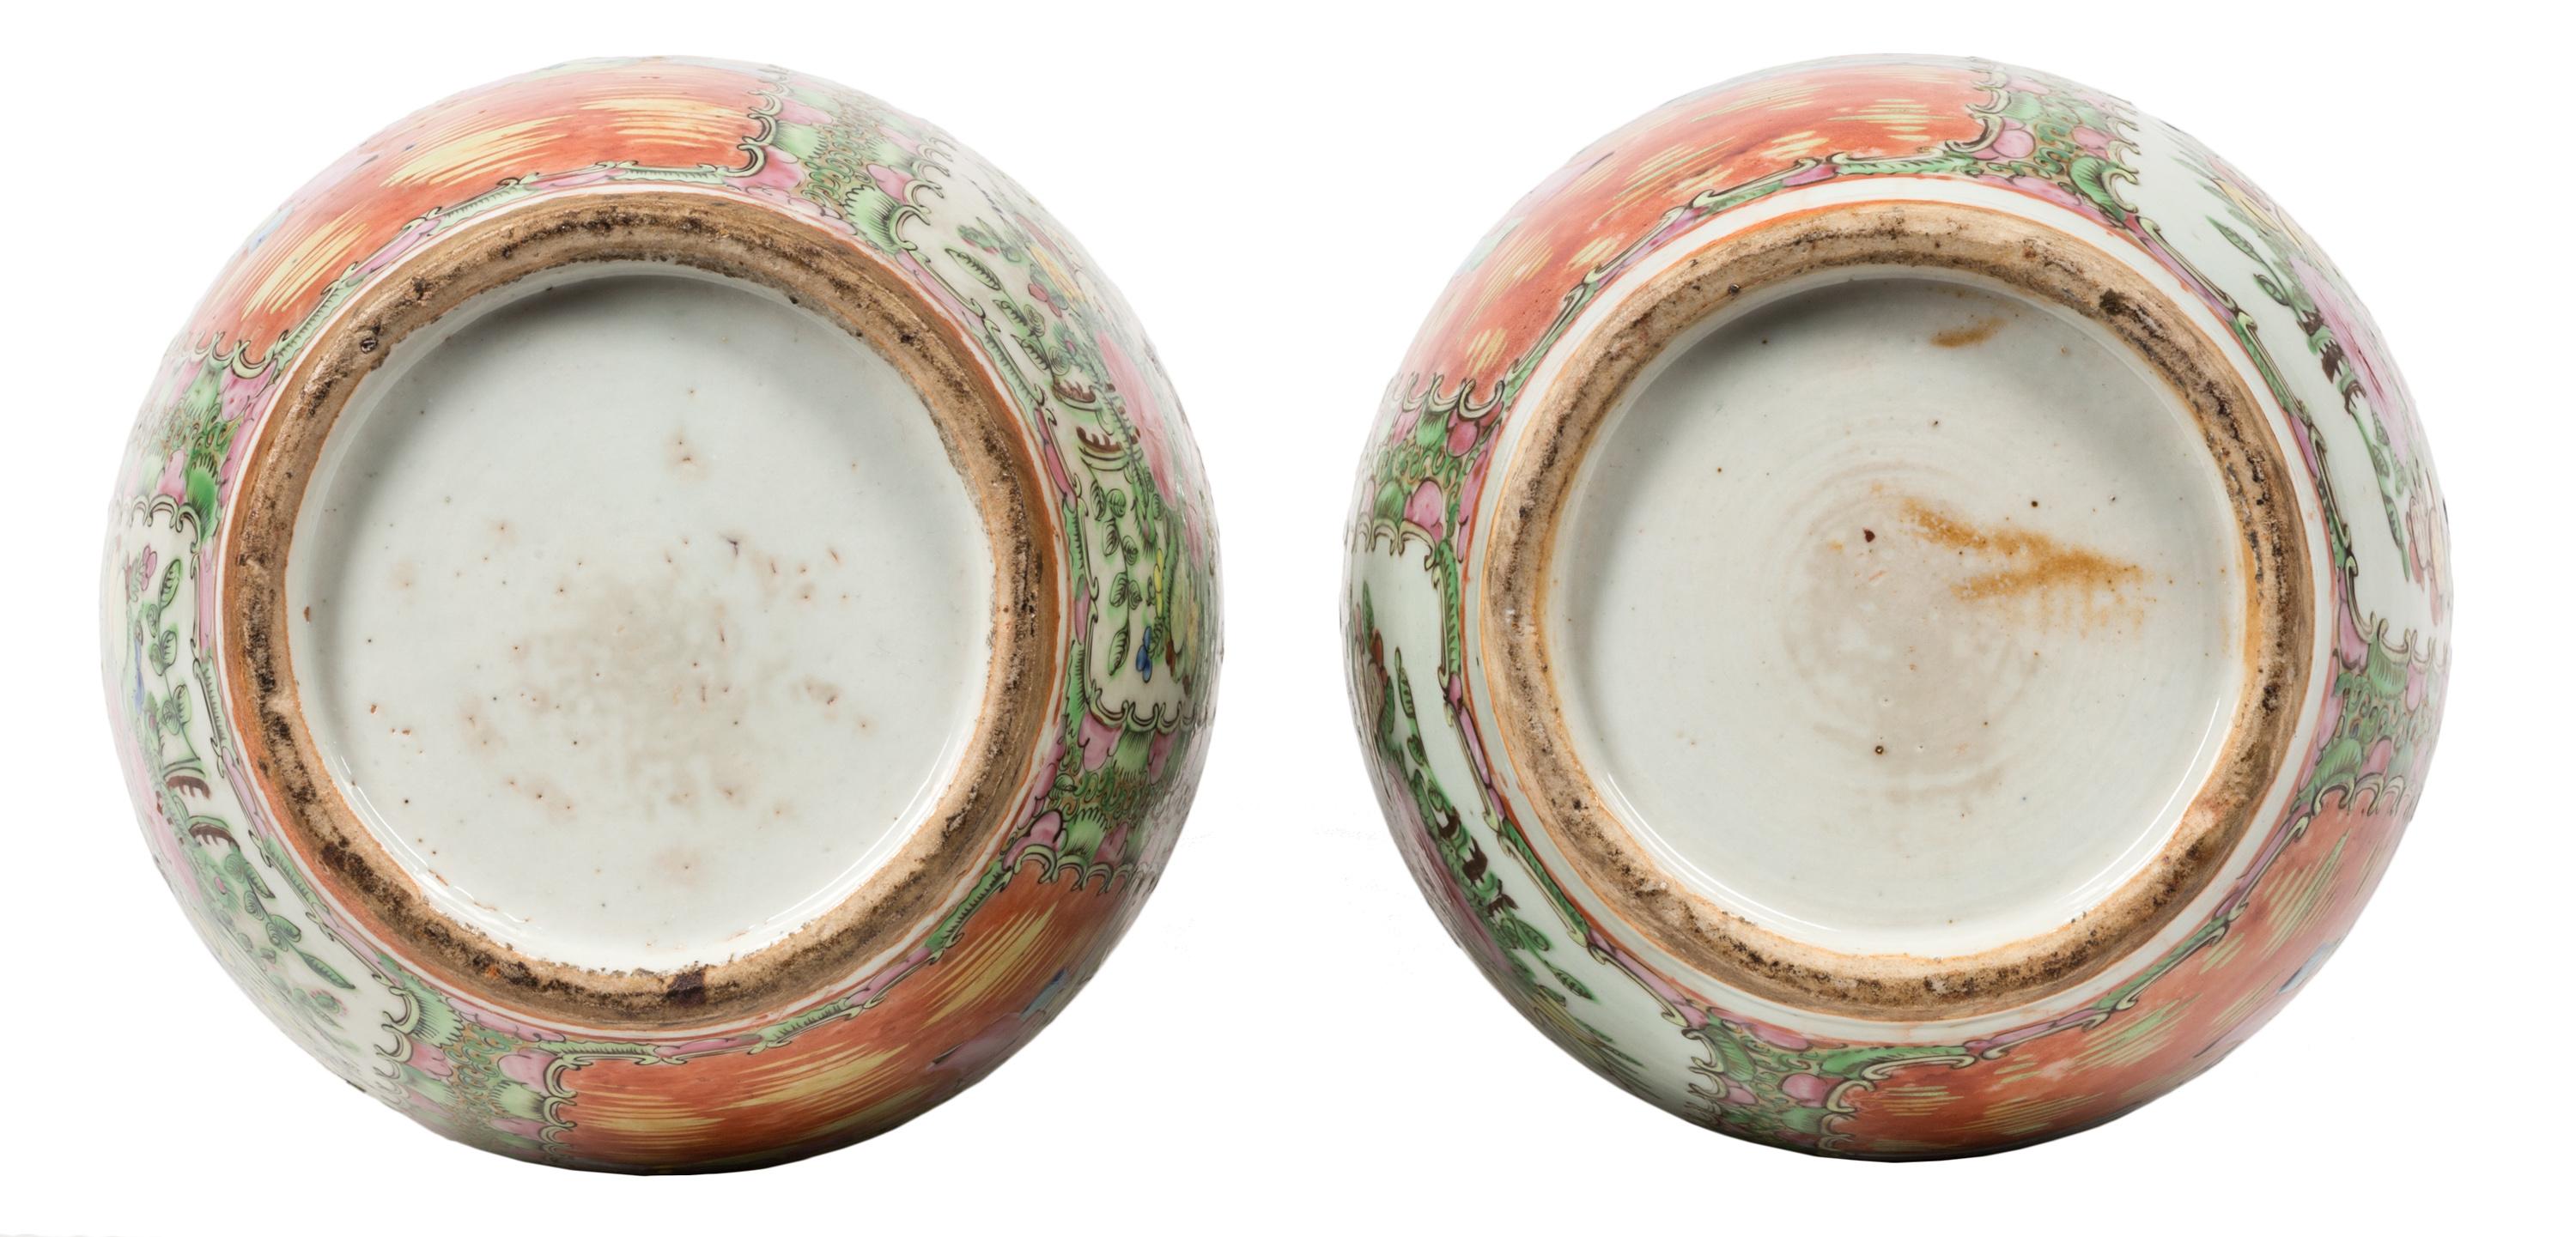 Glazed Pair 19th Century Canton Chinese Urns in Famille Rose Style, Bright Colors